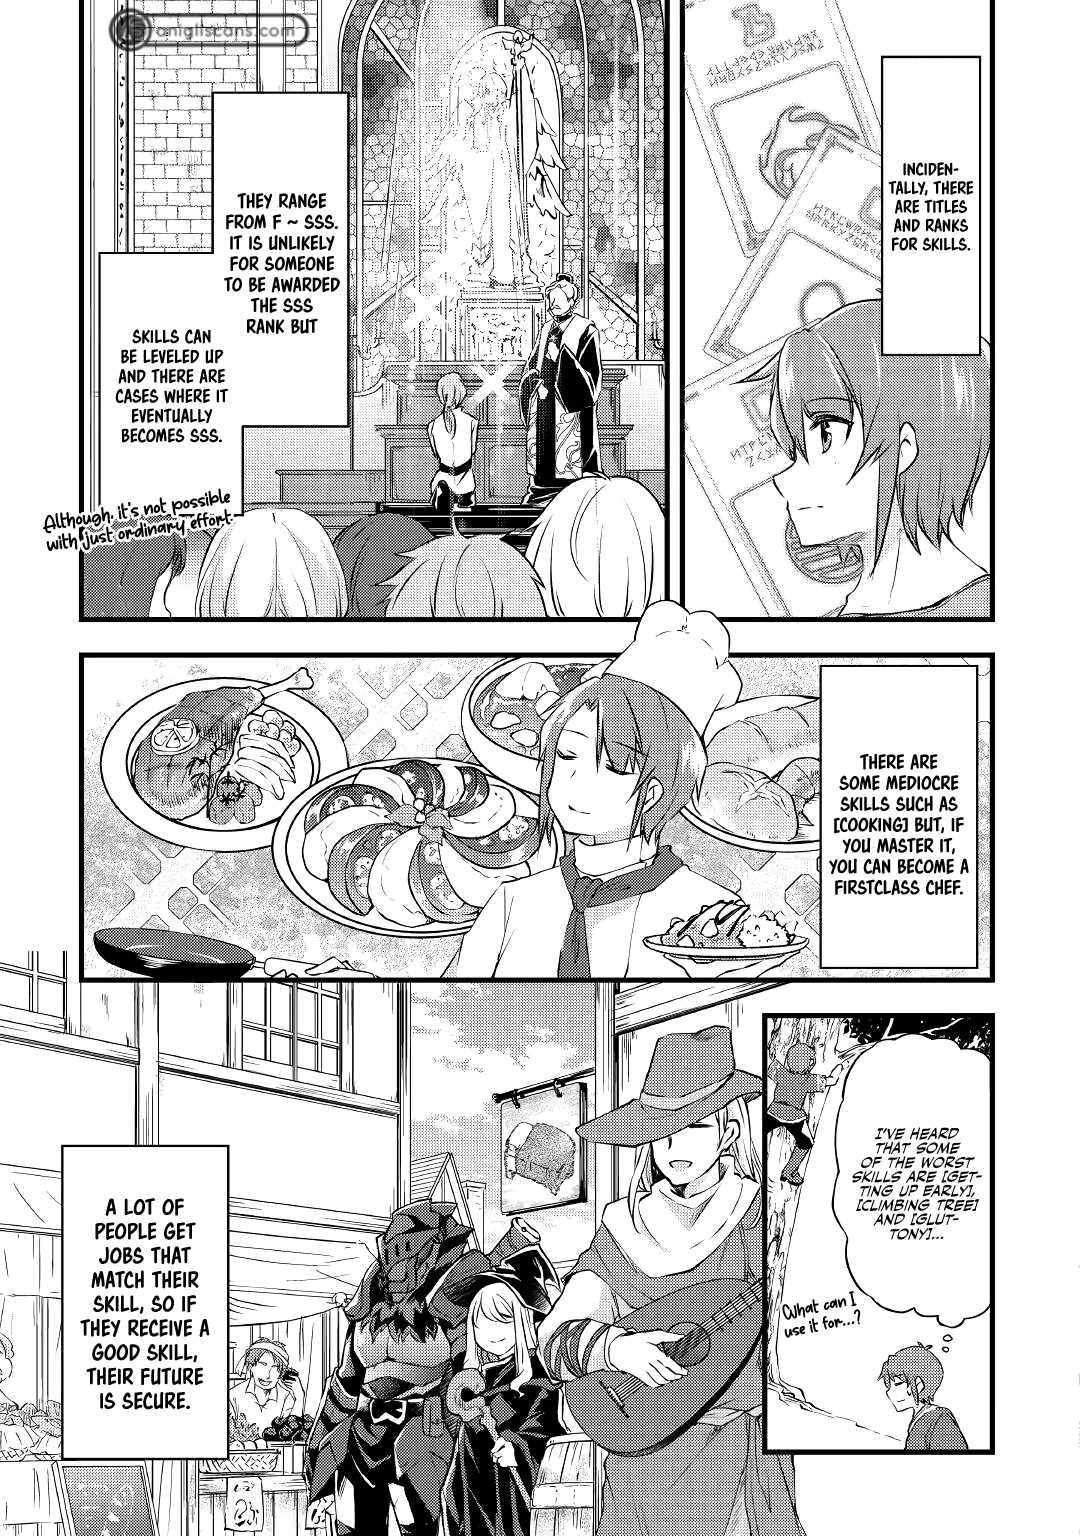 Infinite skill getter Chapter 1-eng-li - Page 5